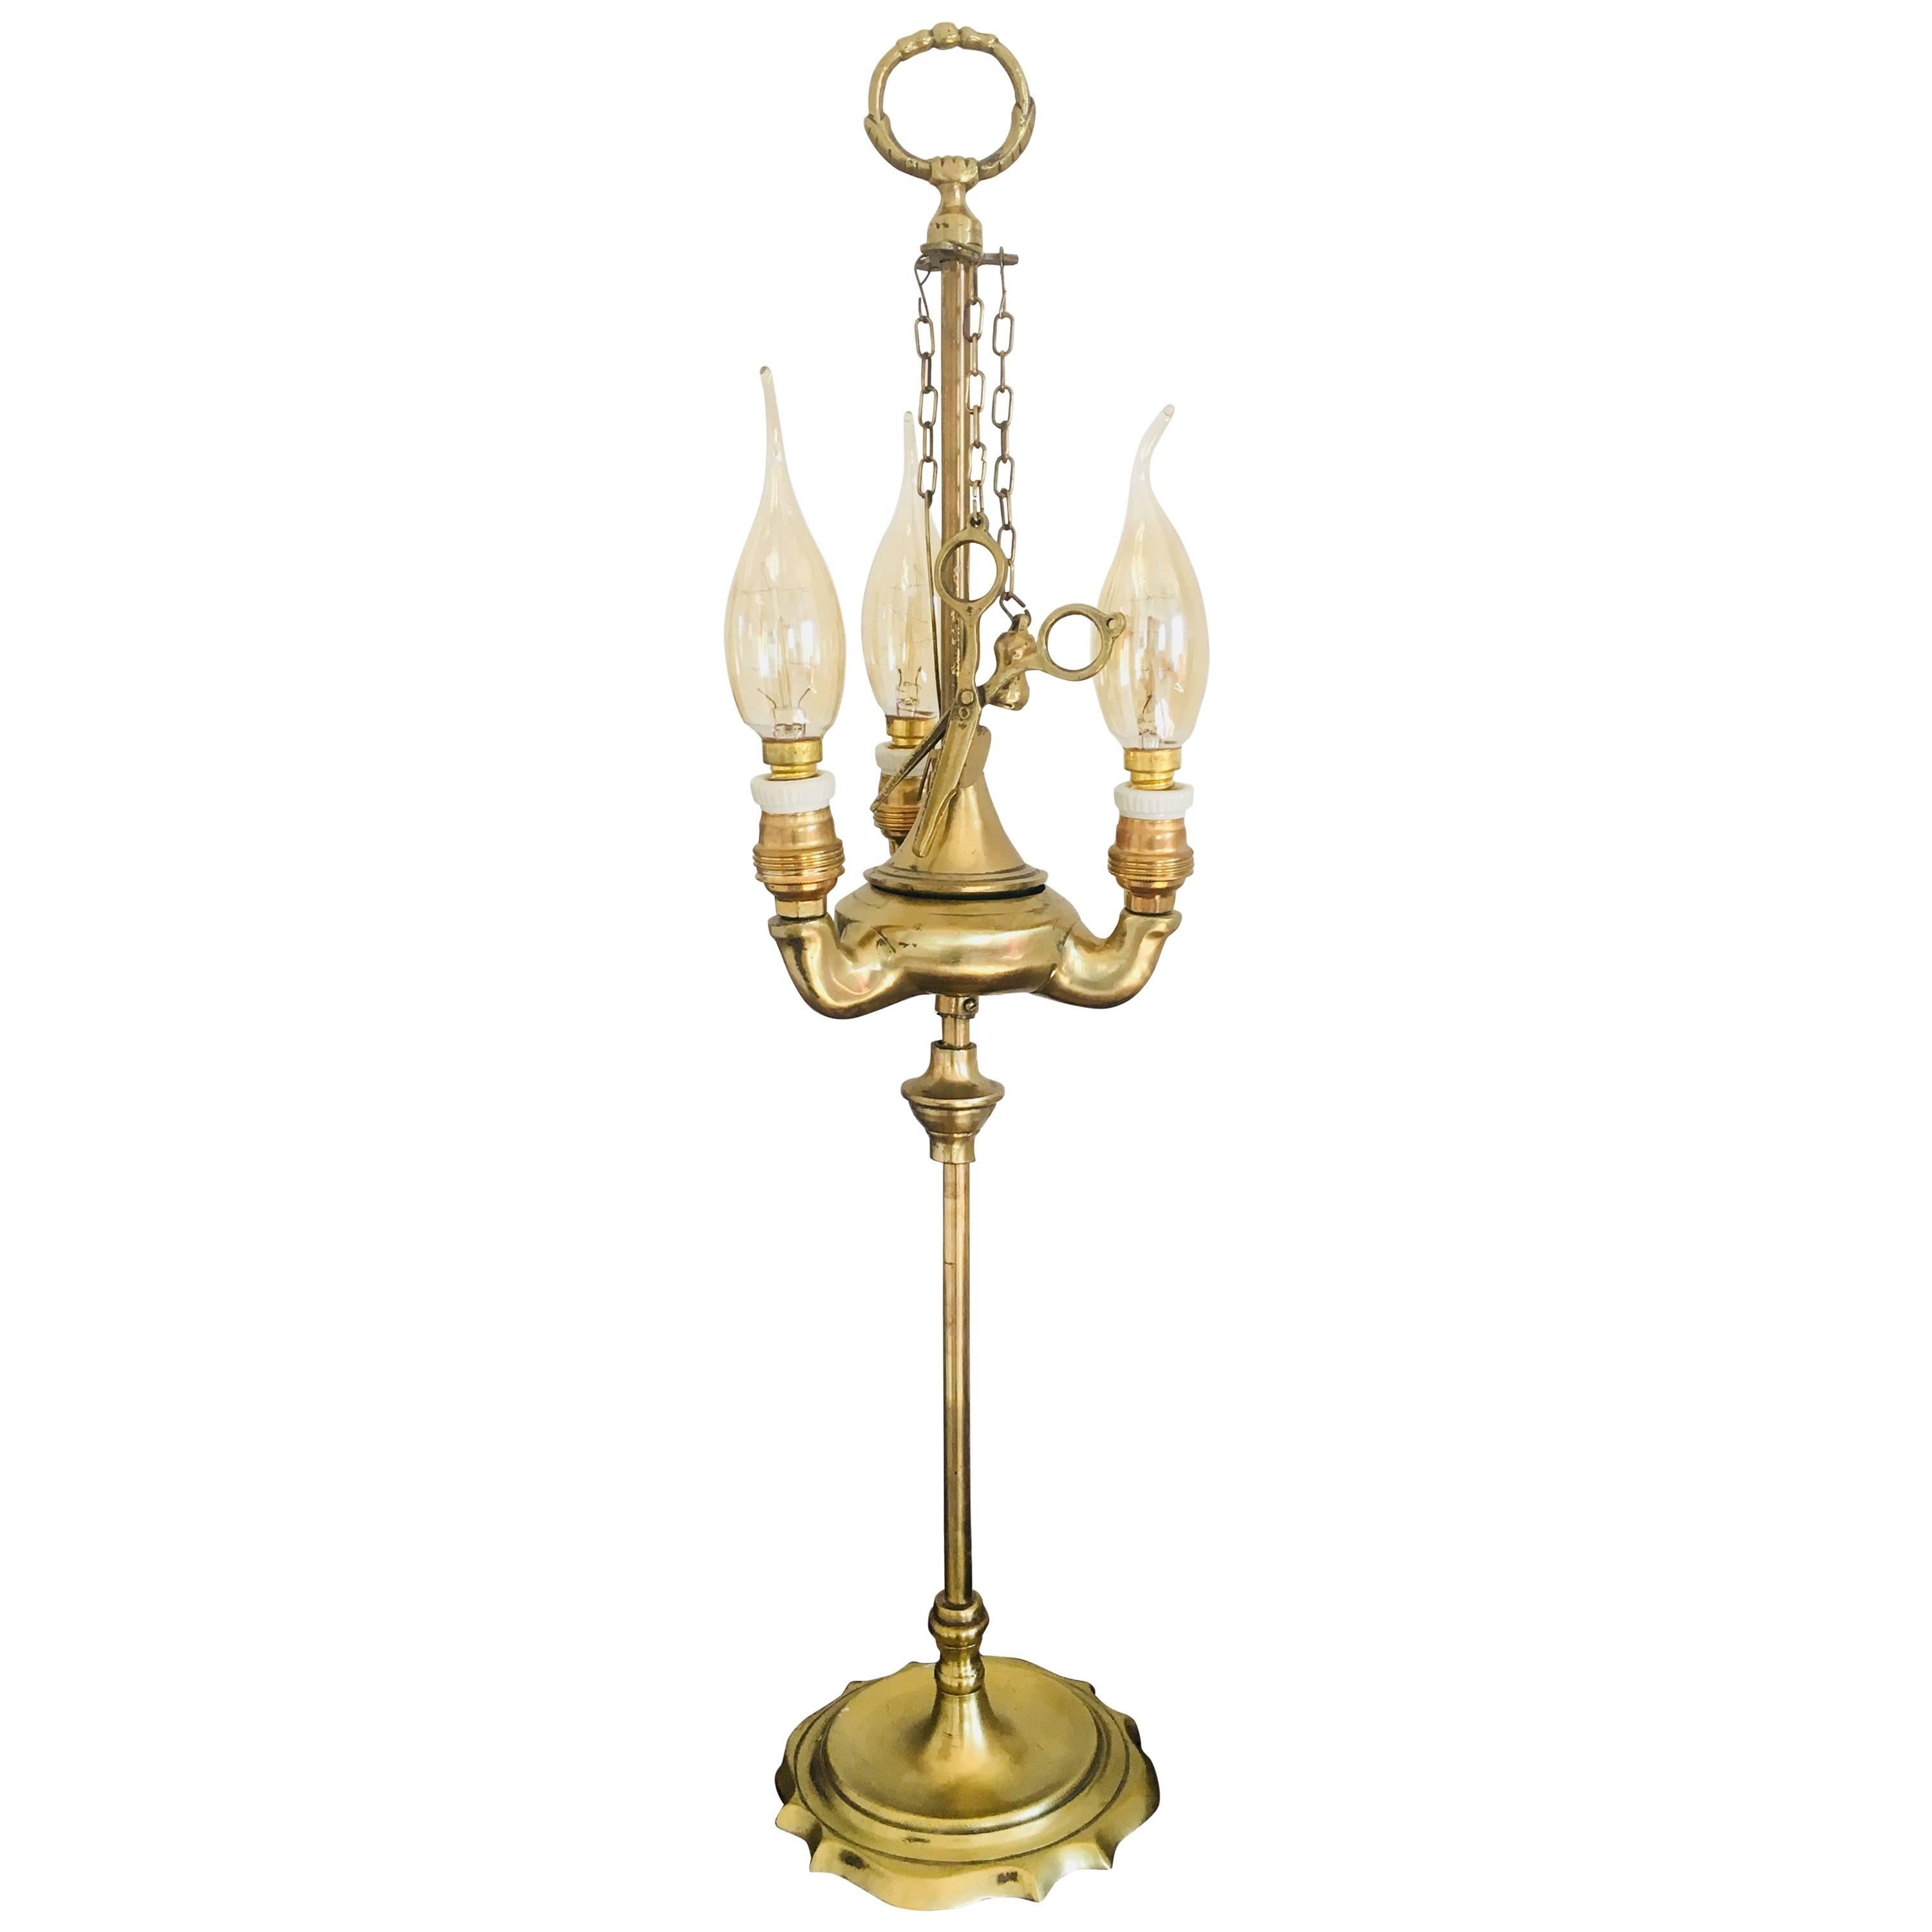 19th Century French Brass Desk Adjustable Lamp in Empire Style For Sale